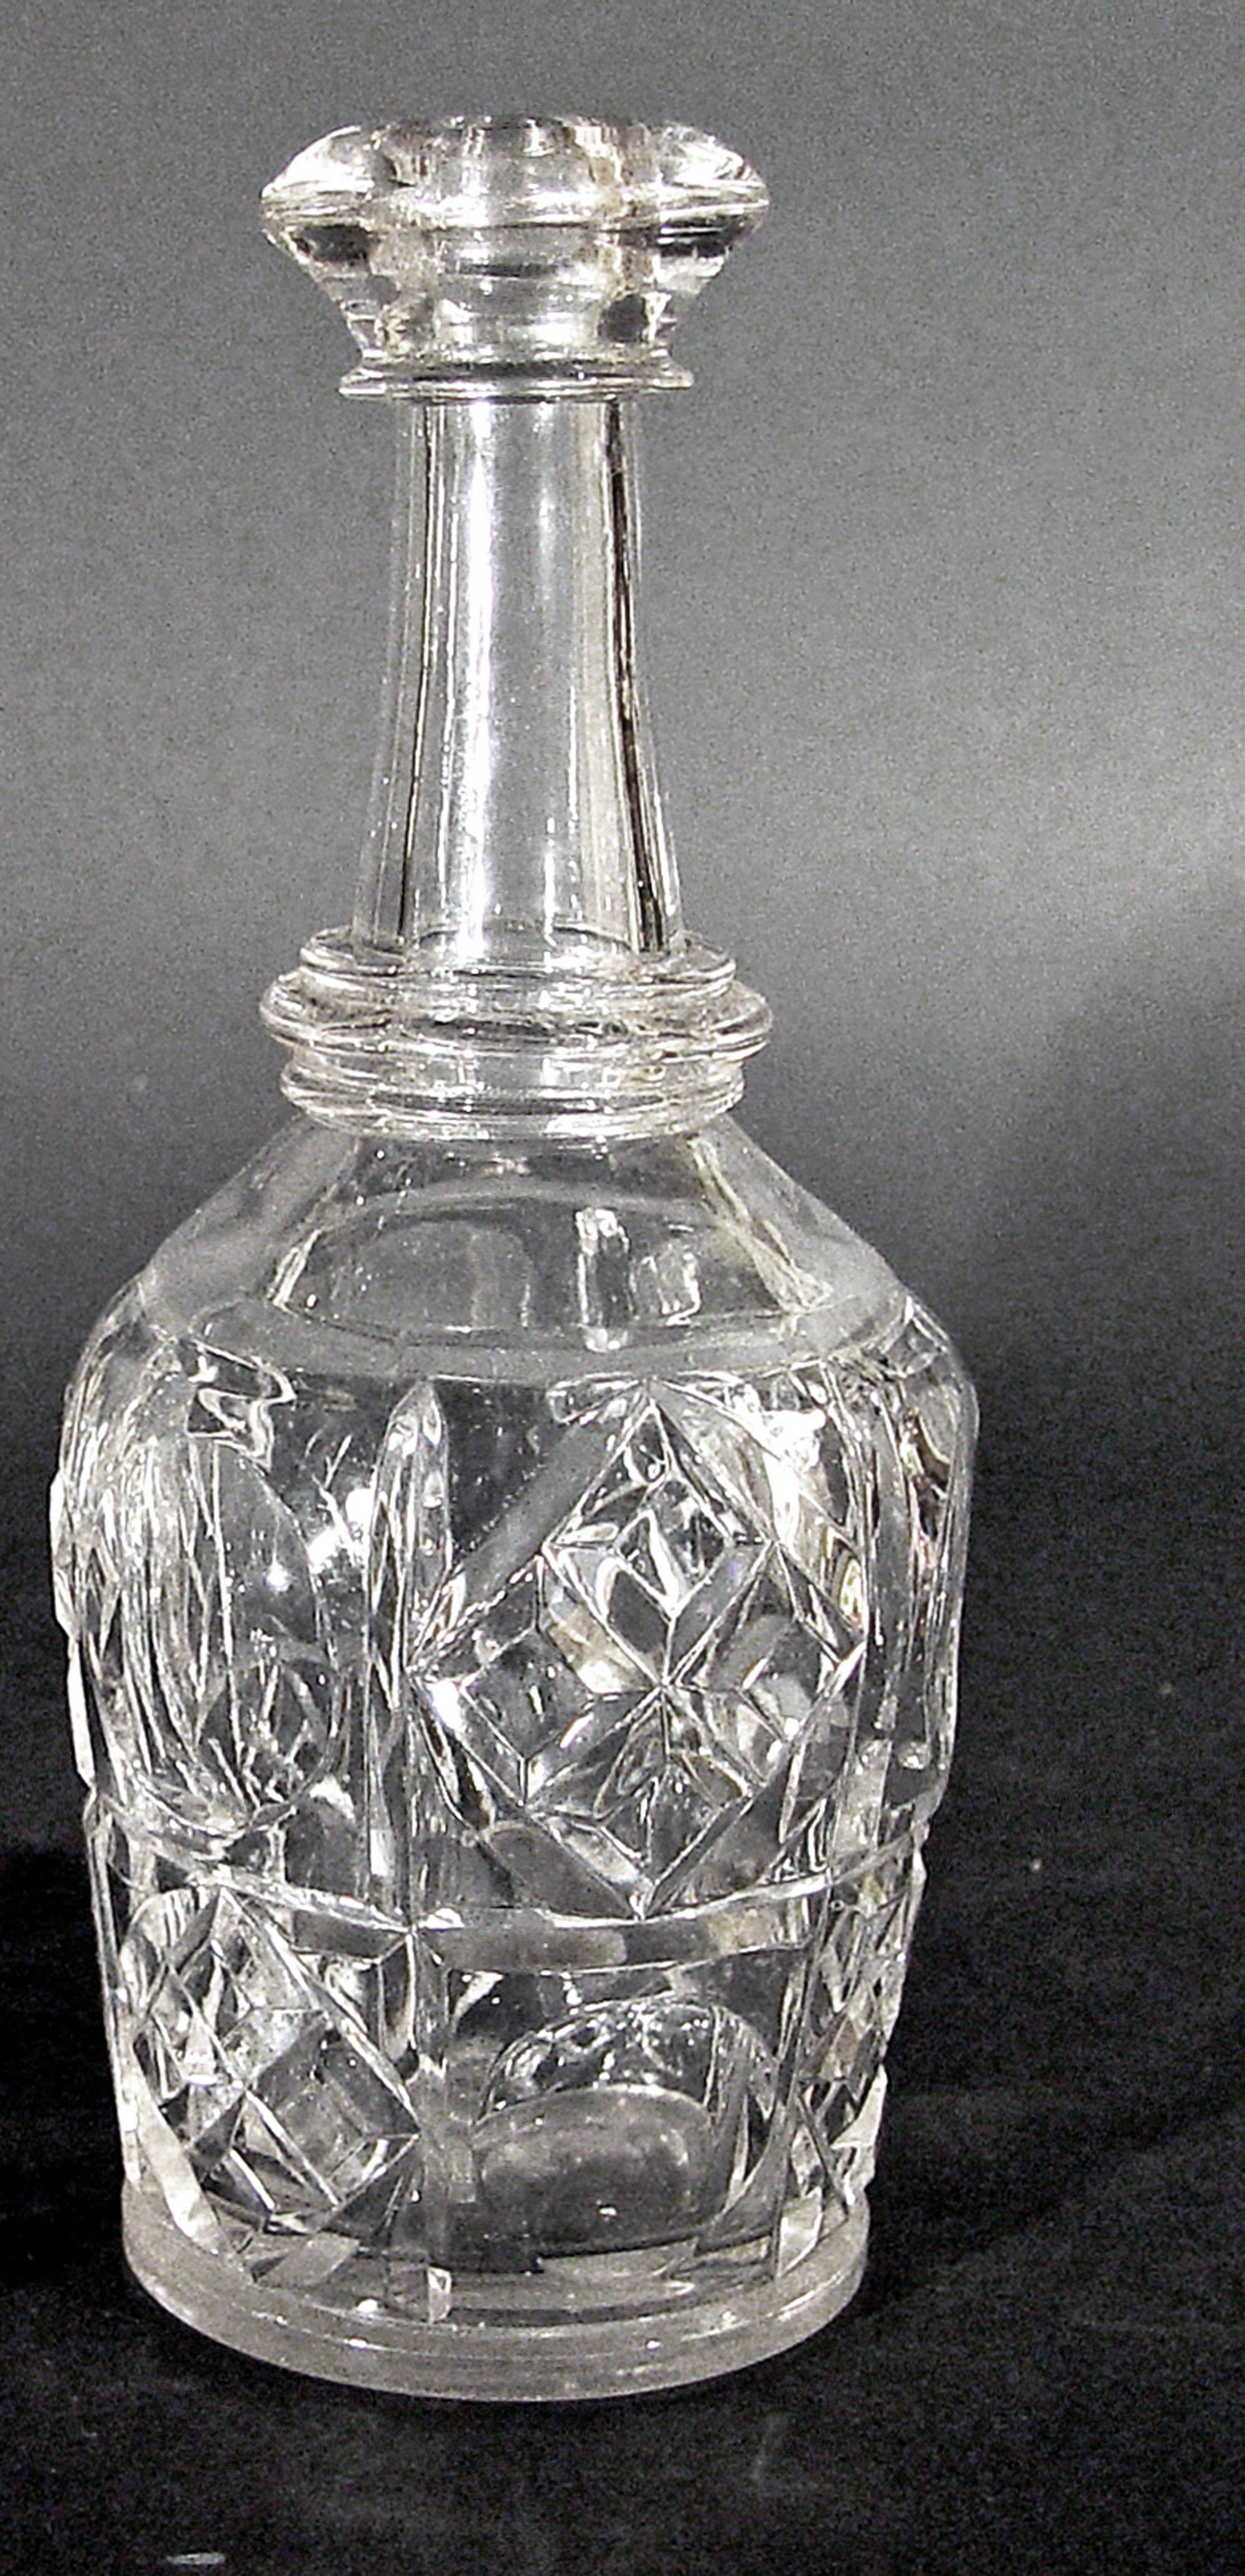 American Classical Pittsburgh Glass Bar Bottles or Decanters, Bakewell, Pears & Co.